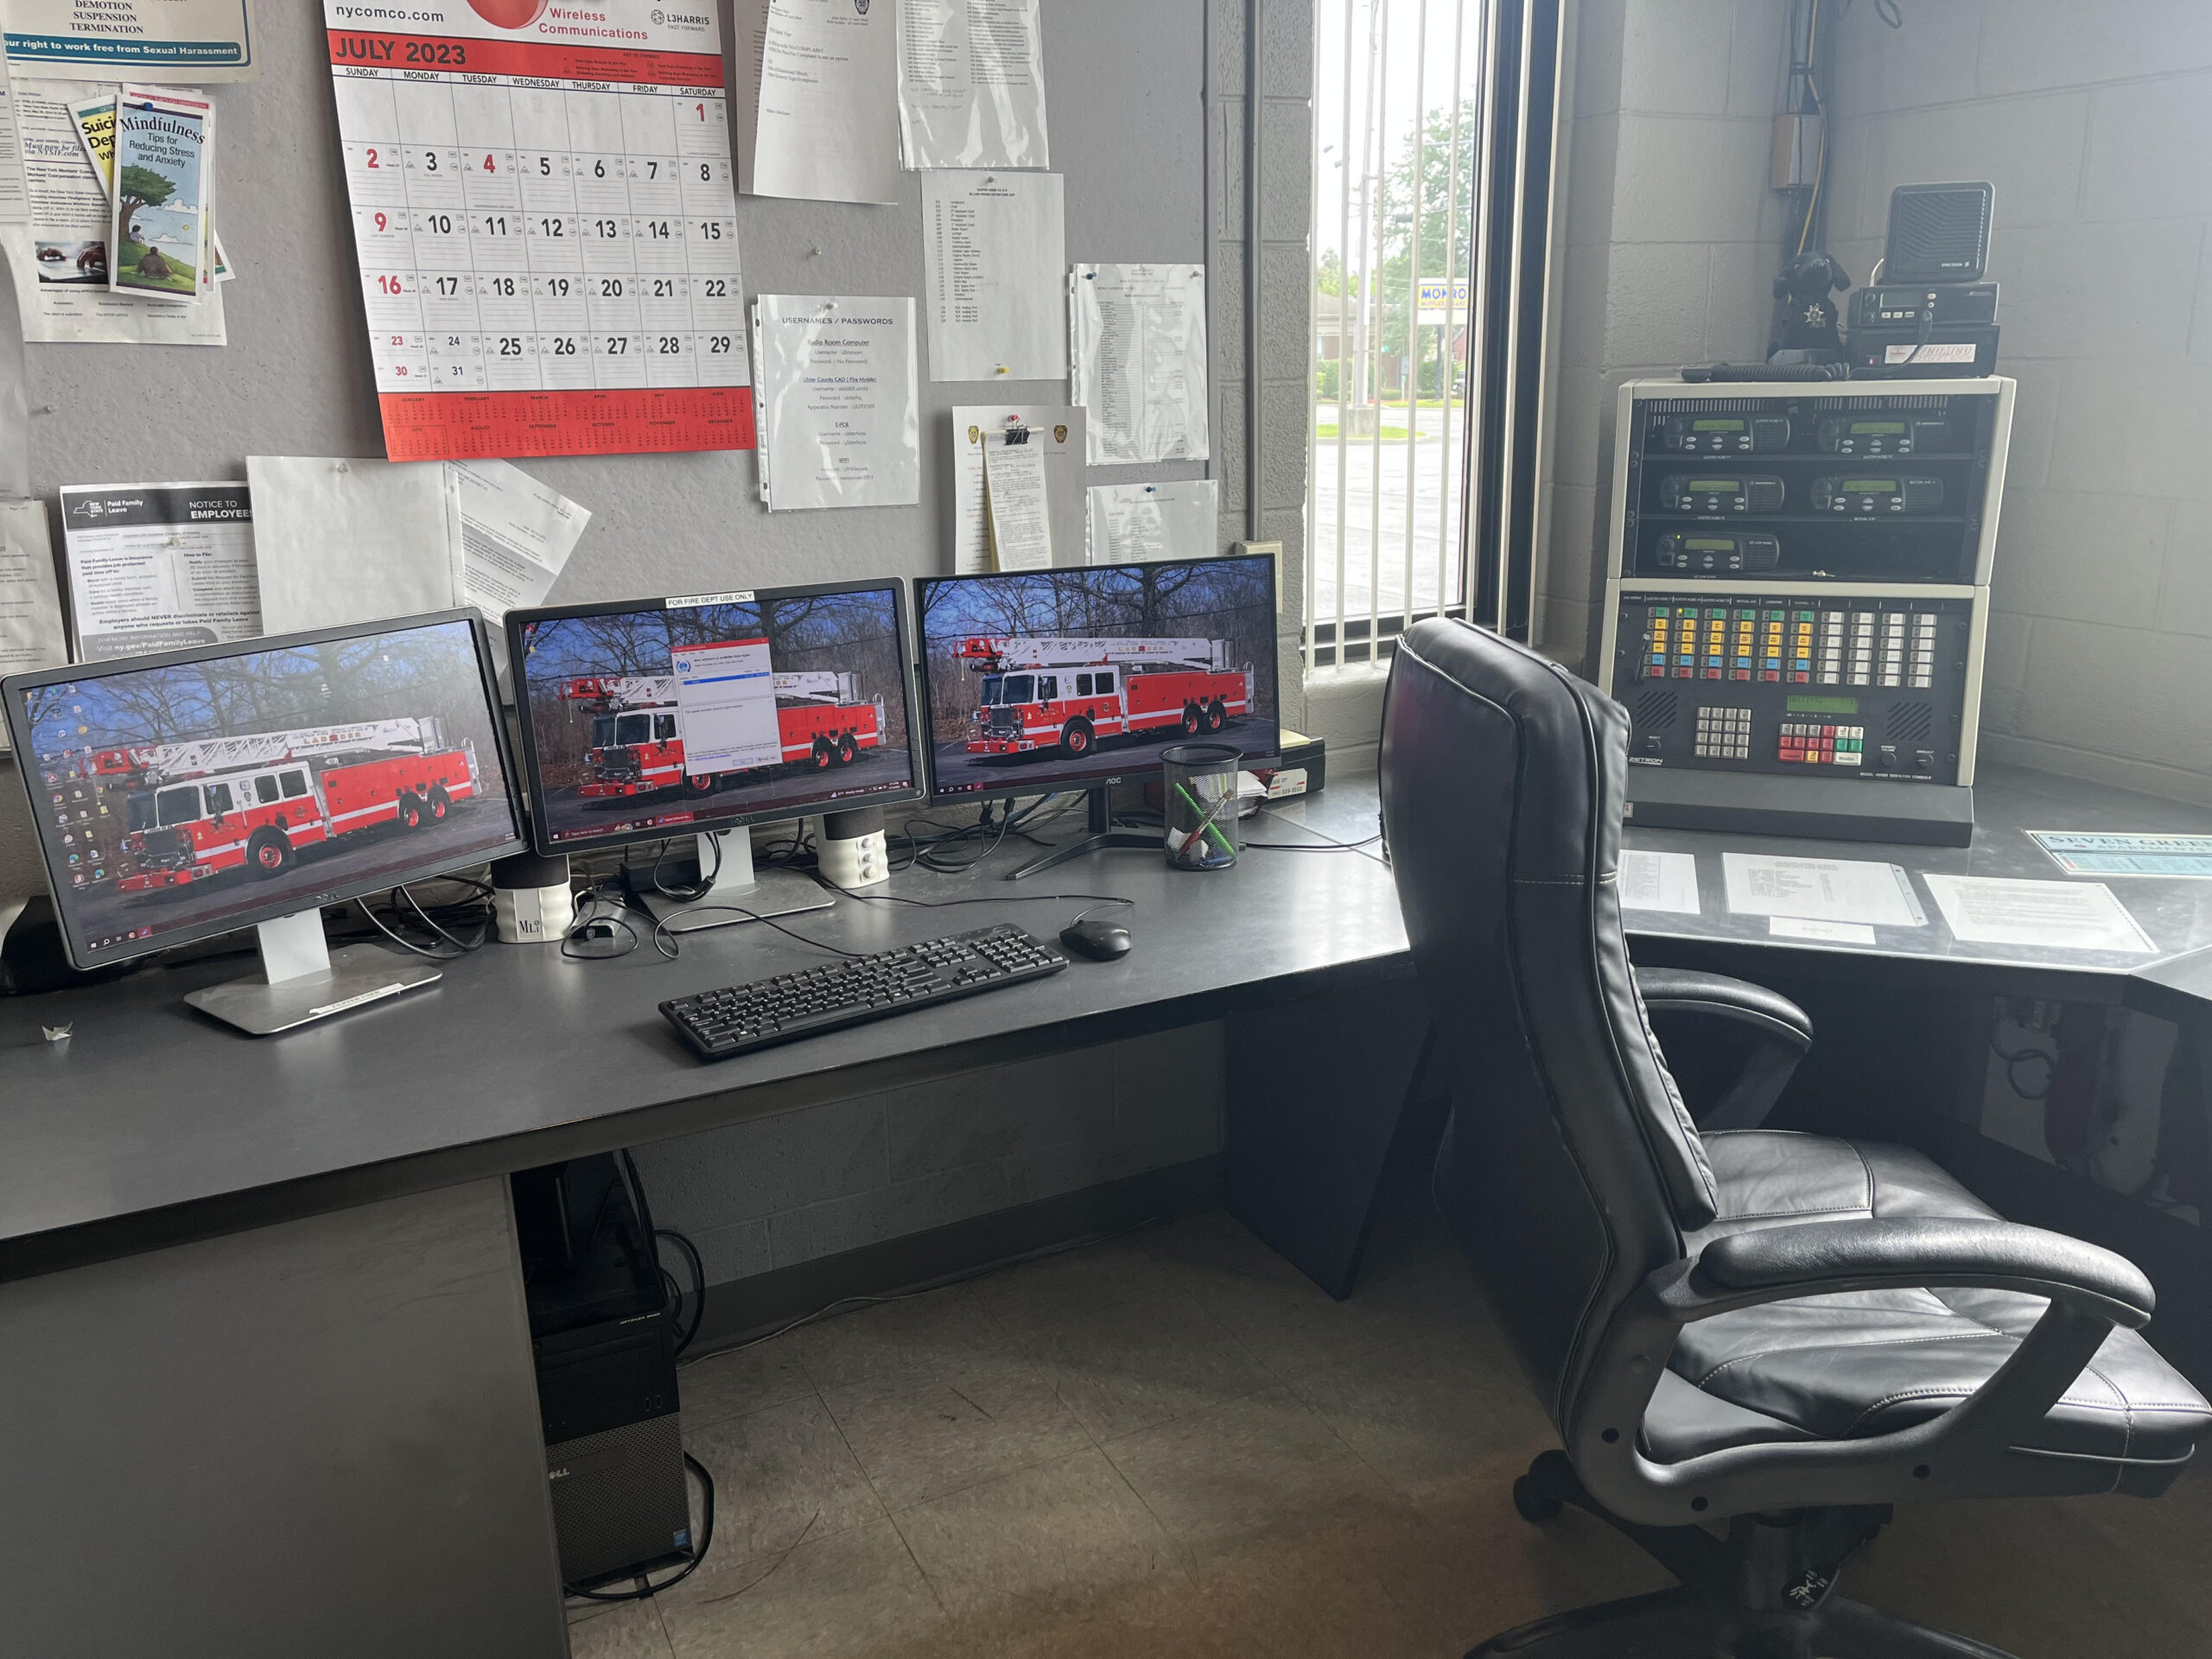 Ulster Hose Communications Center, which includes three desktop computers and a large radio display for communicating with members on scene, mutual aid departments and Ulster County 911